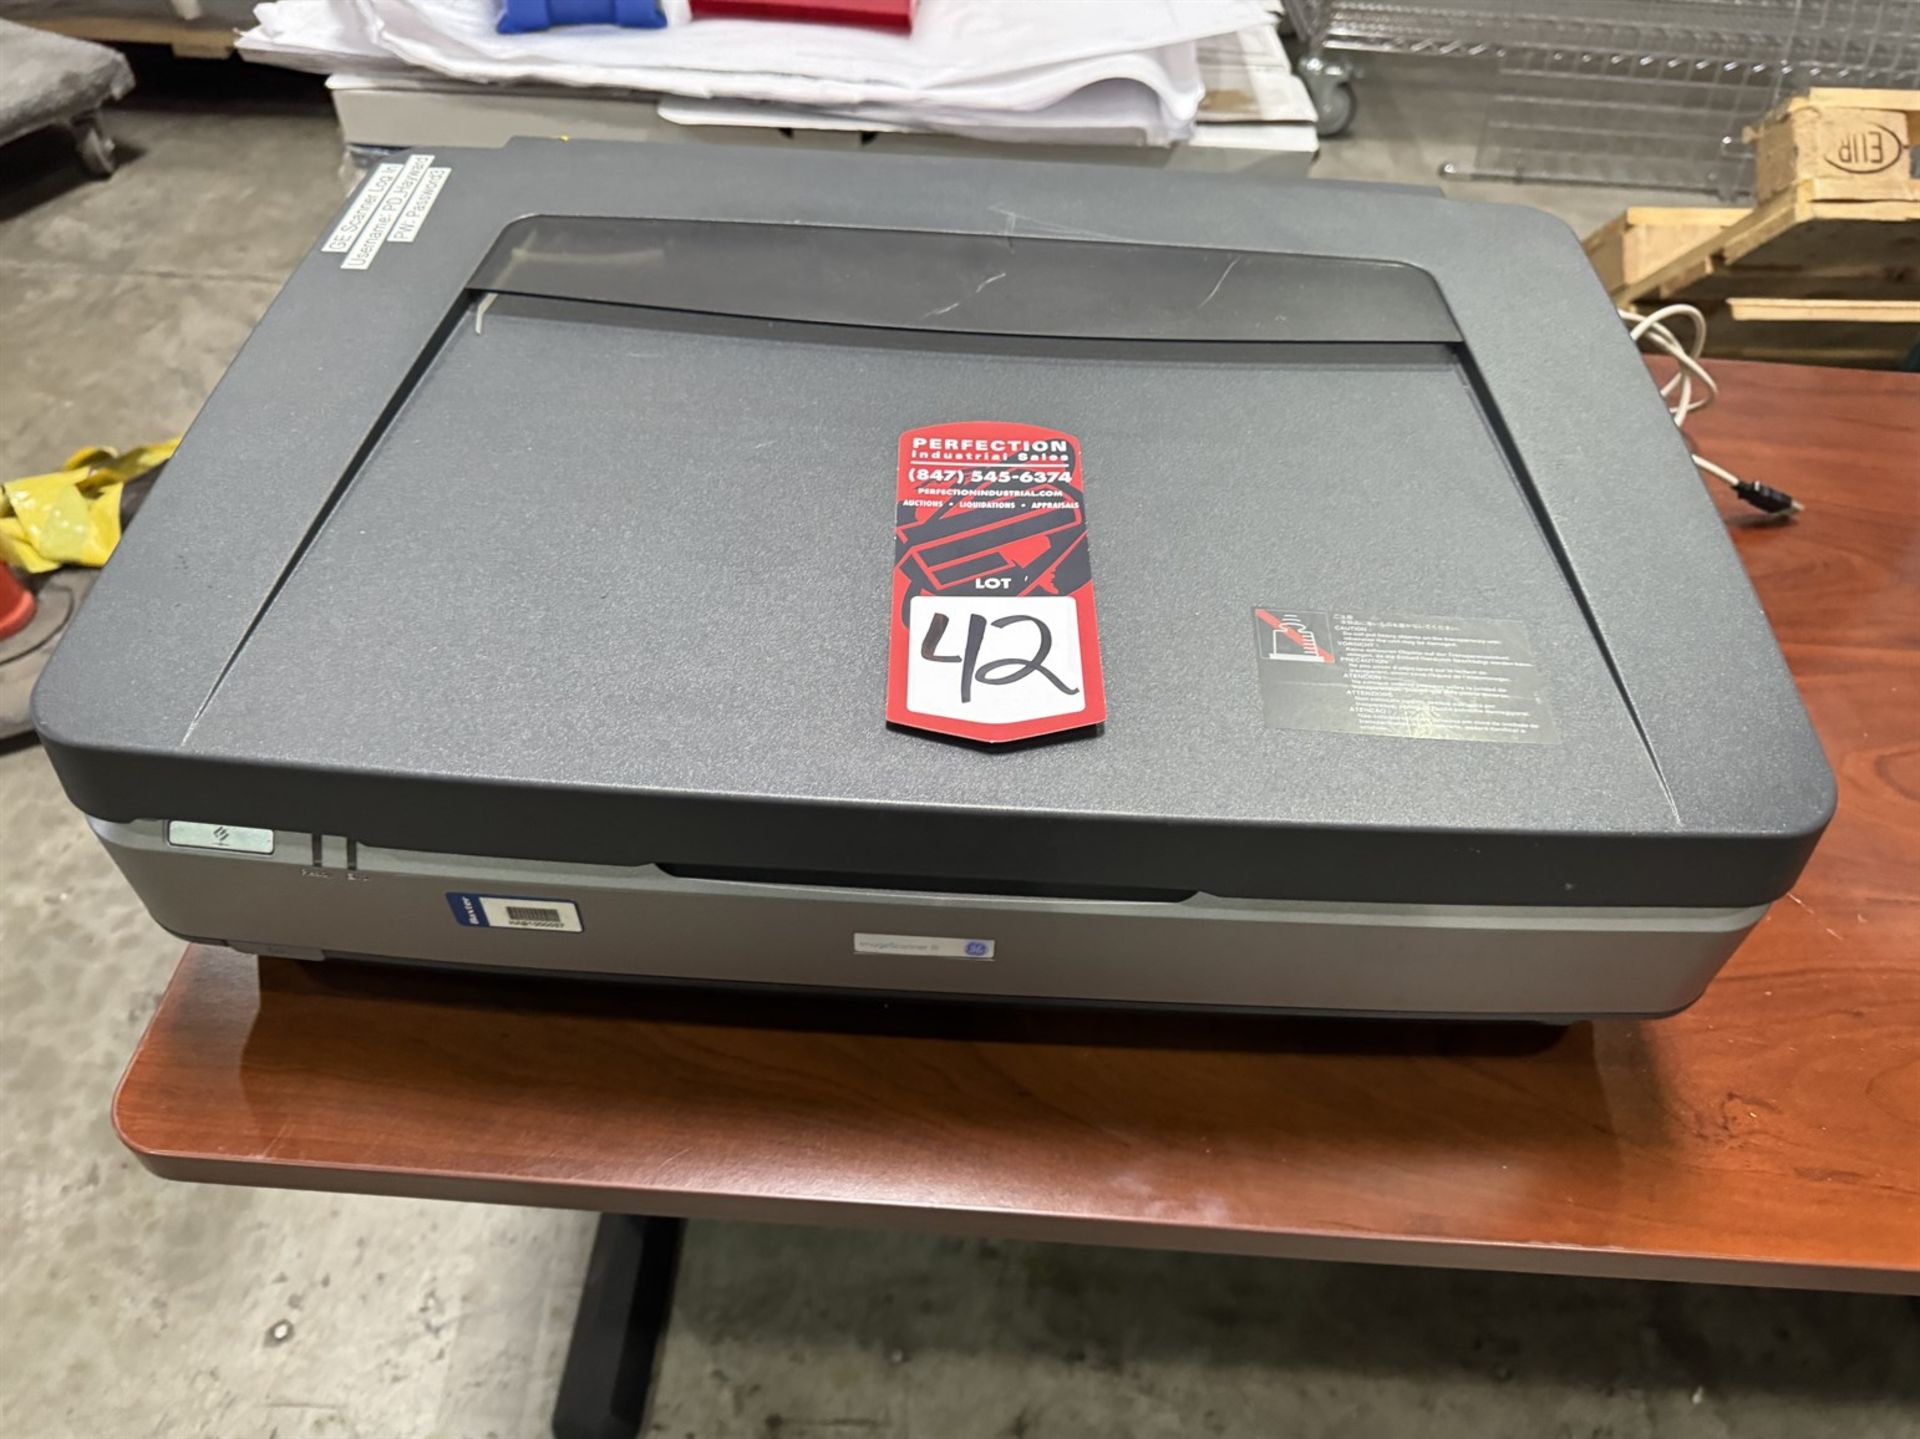 EPSON Expression 10000 XL Flatbed Scanner, s/n FVU0015800, w/ EPSON A3 Transparency Unit - Image 2 of 7